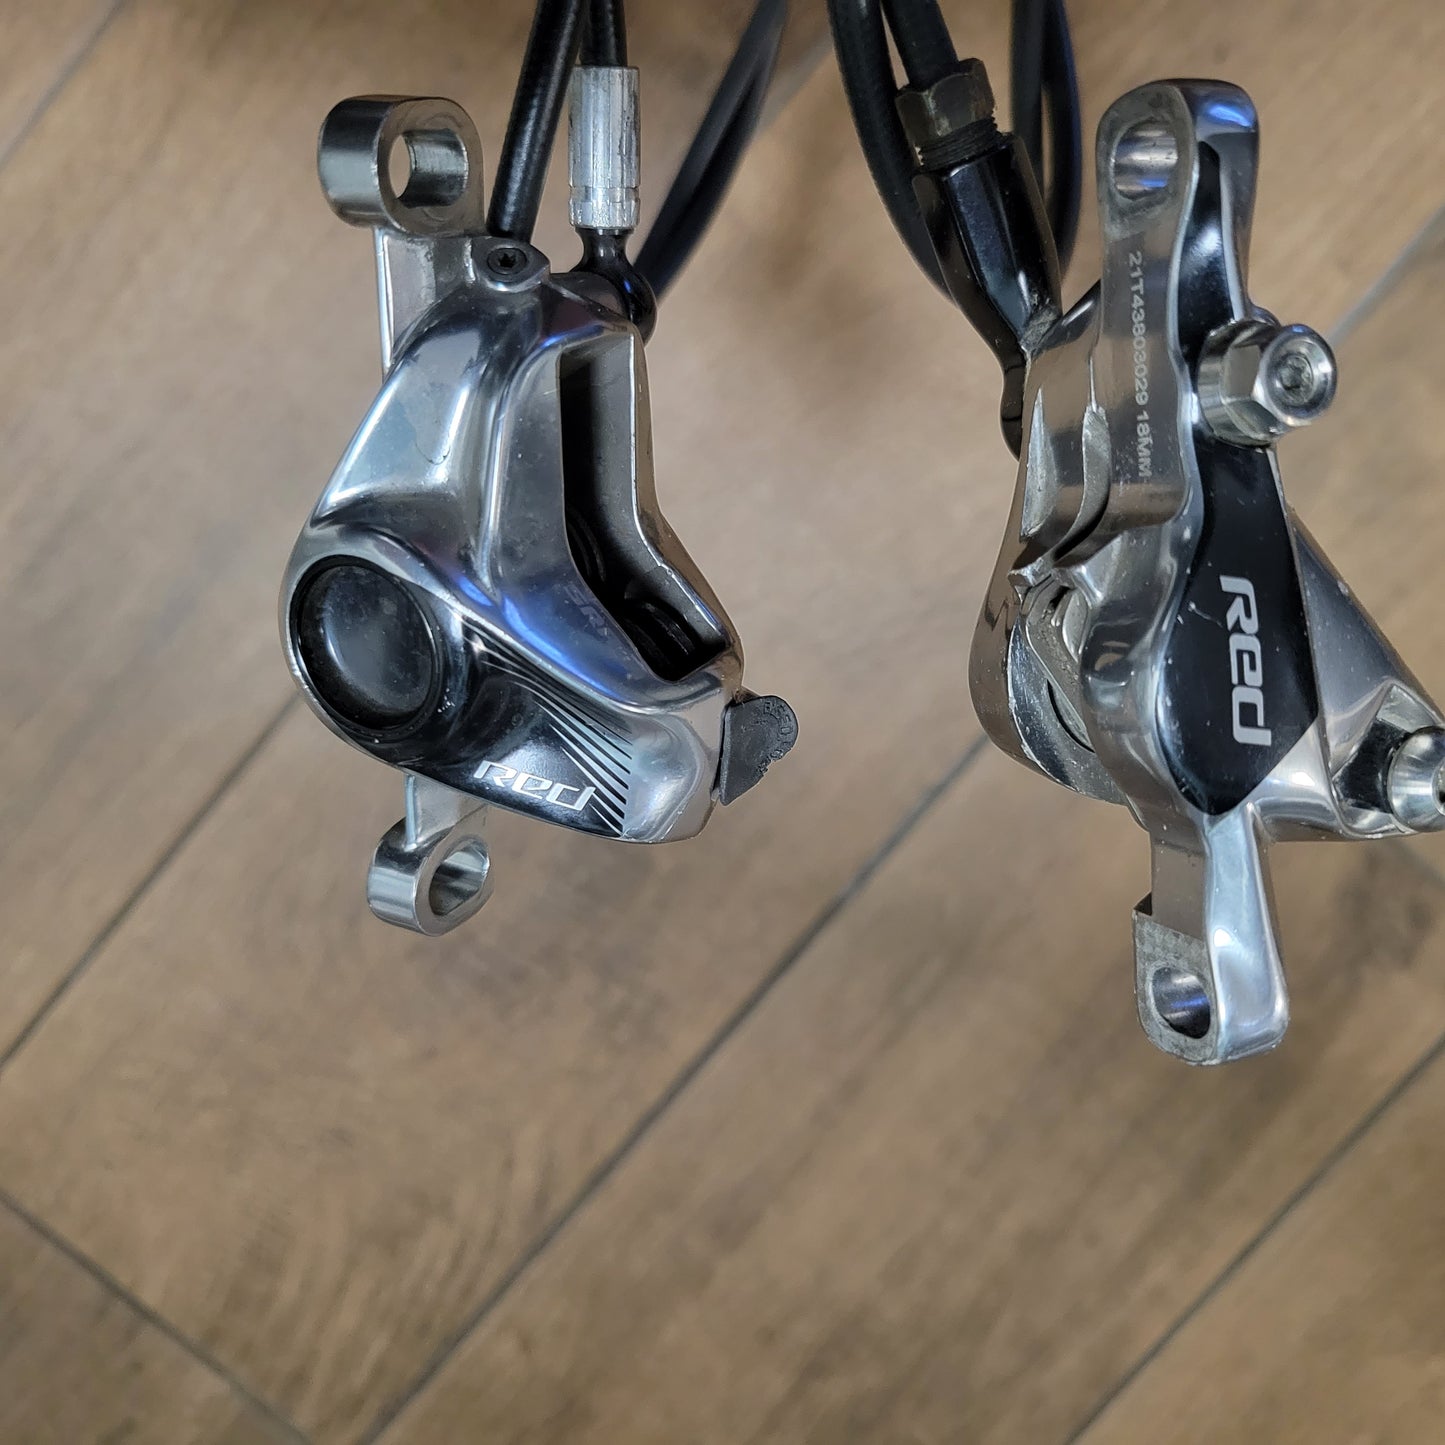 SRAM RED hydraulic post mount calipers